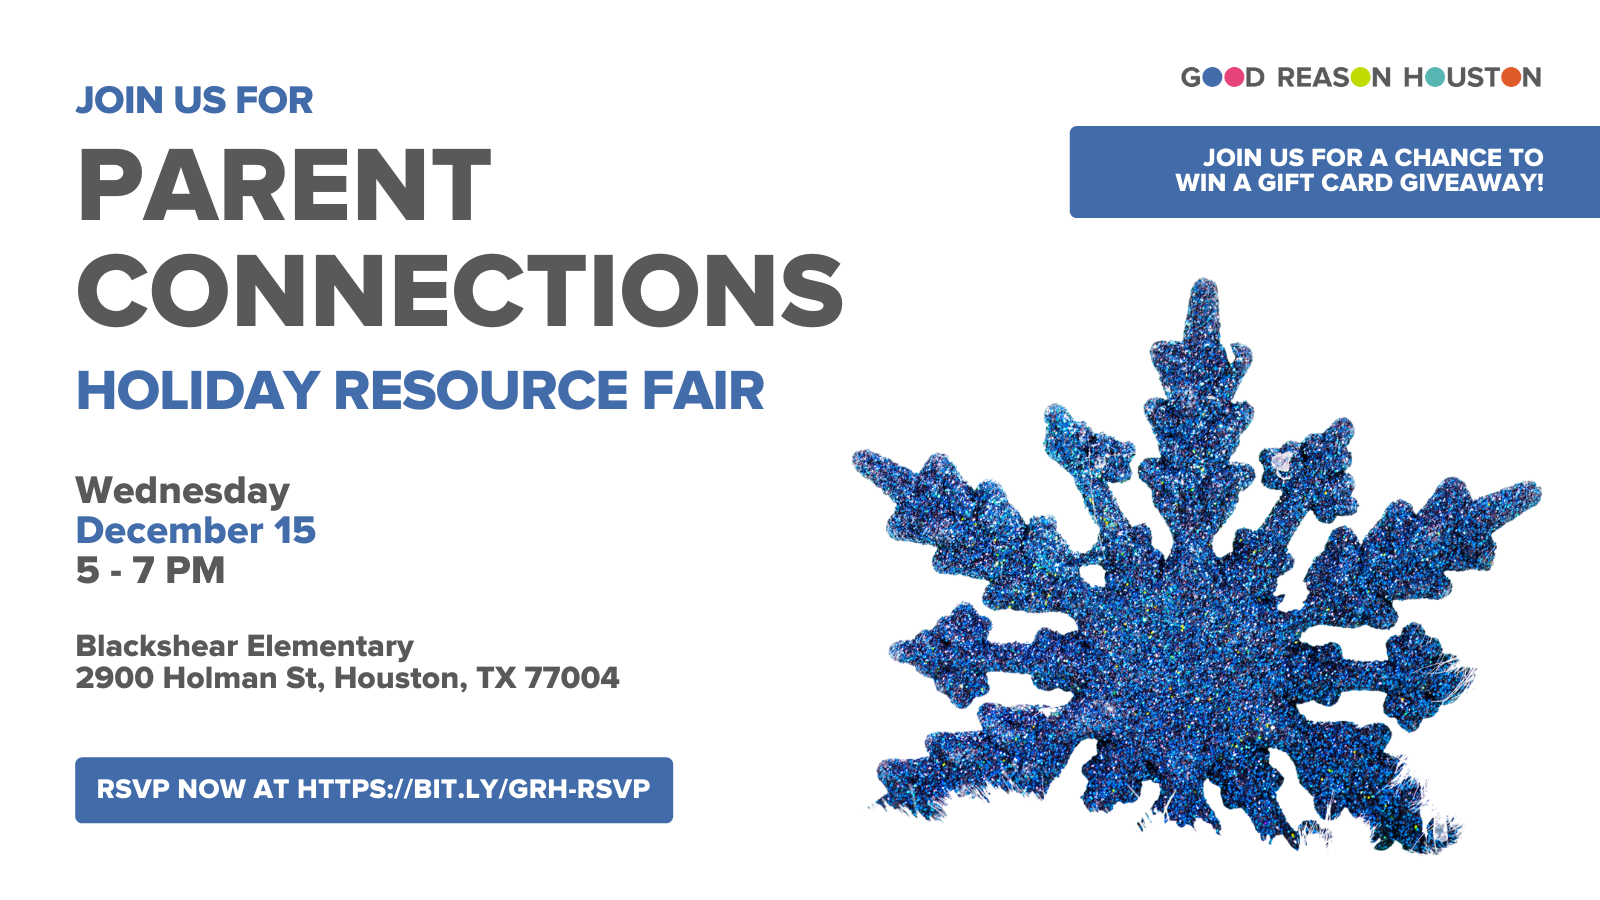 Parent Connections Holiday Resource Fair on December 15